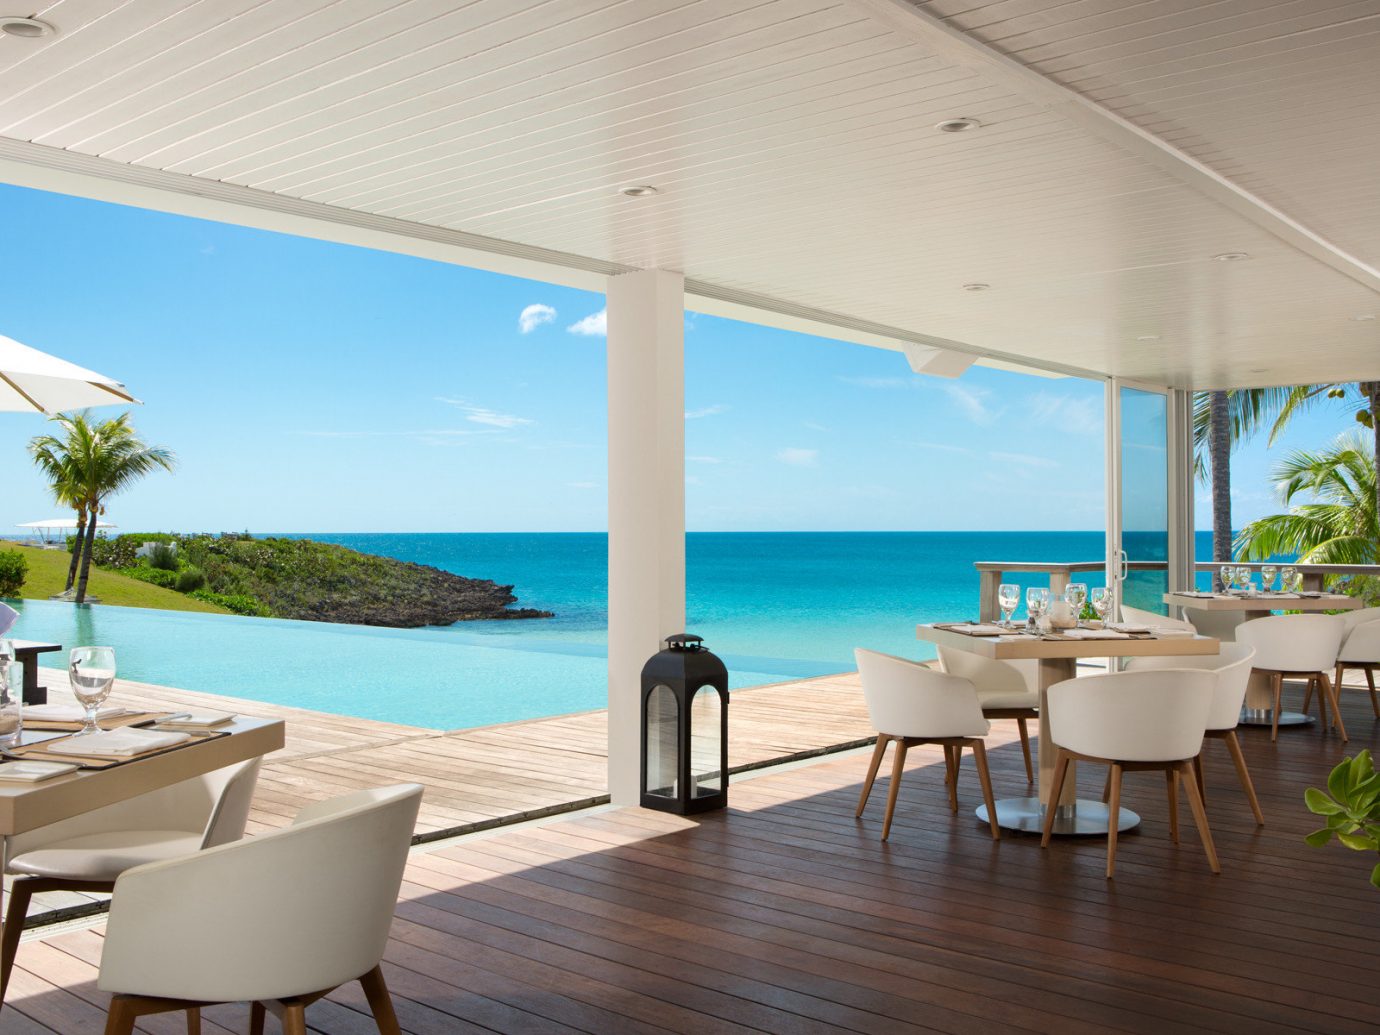 Restaurant view at The Cove Eleuthera